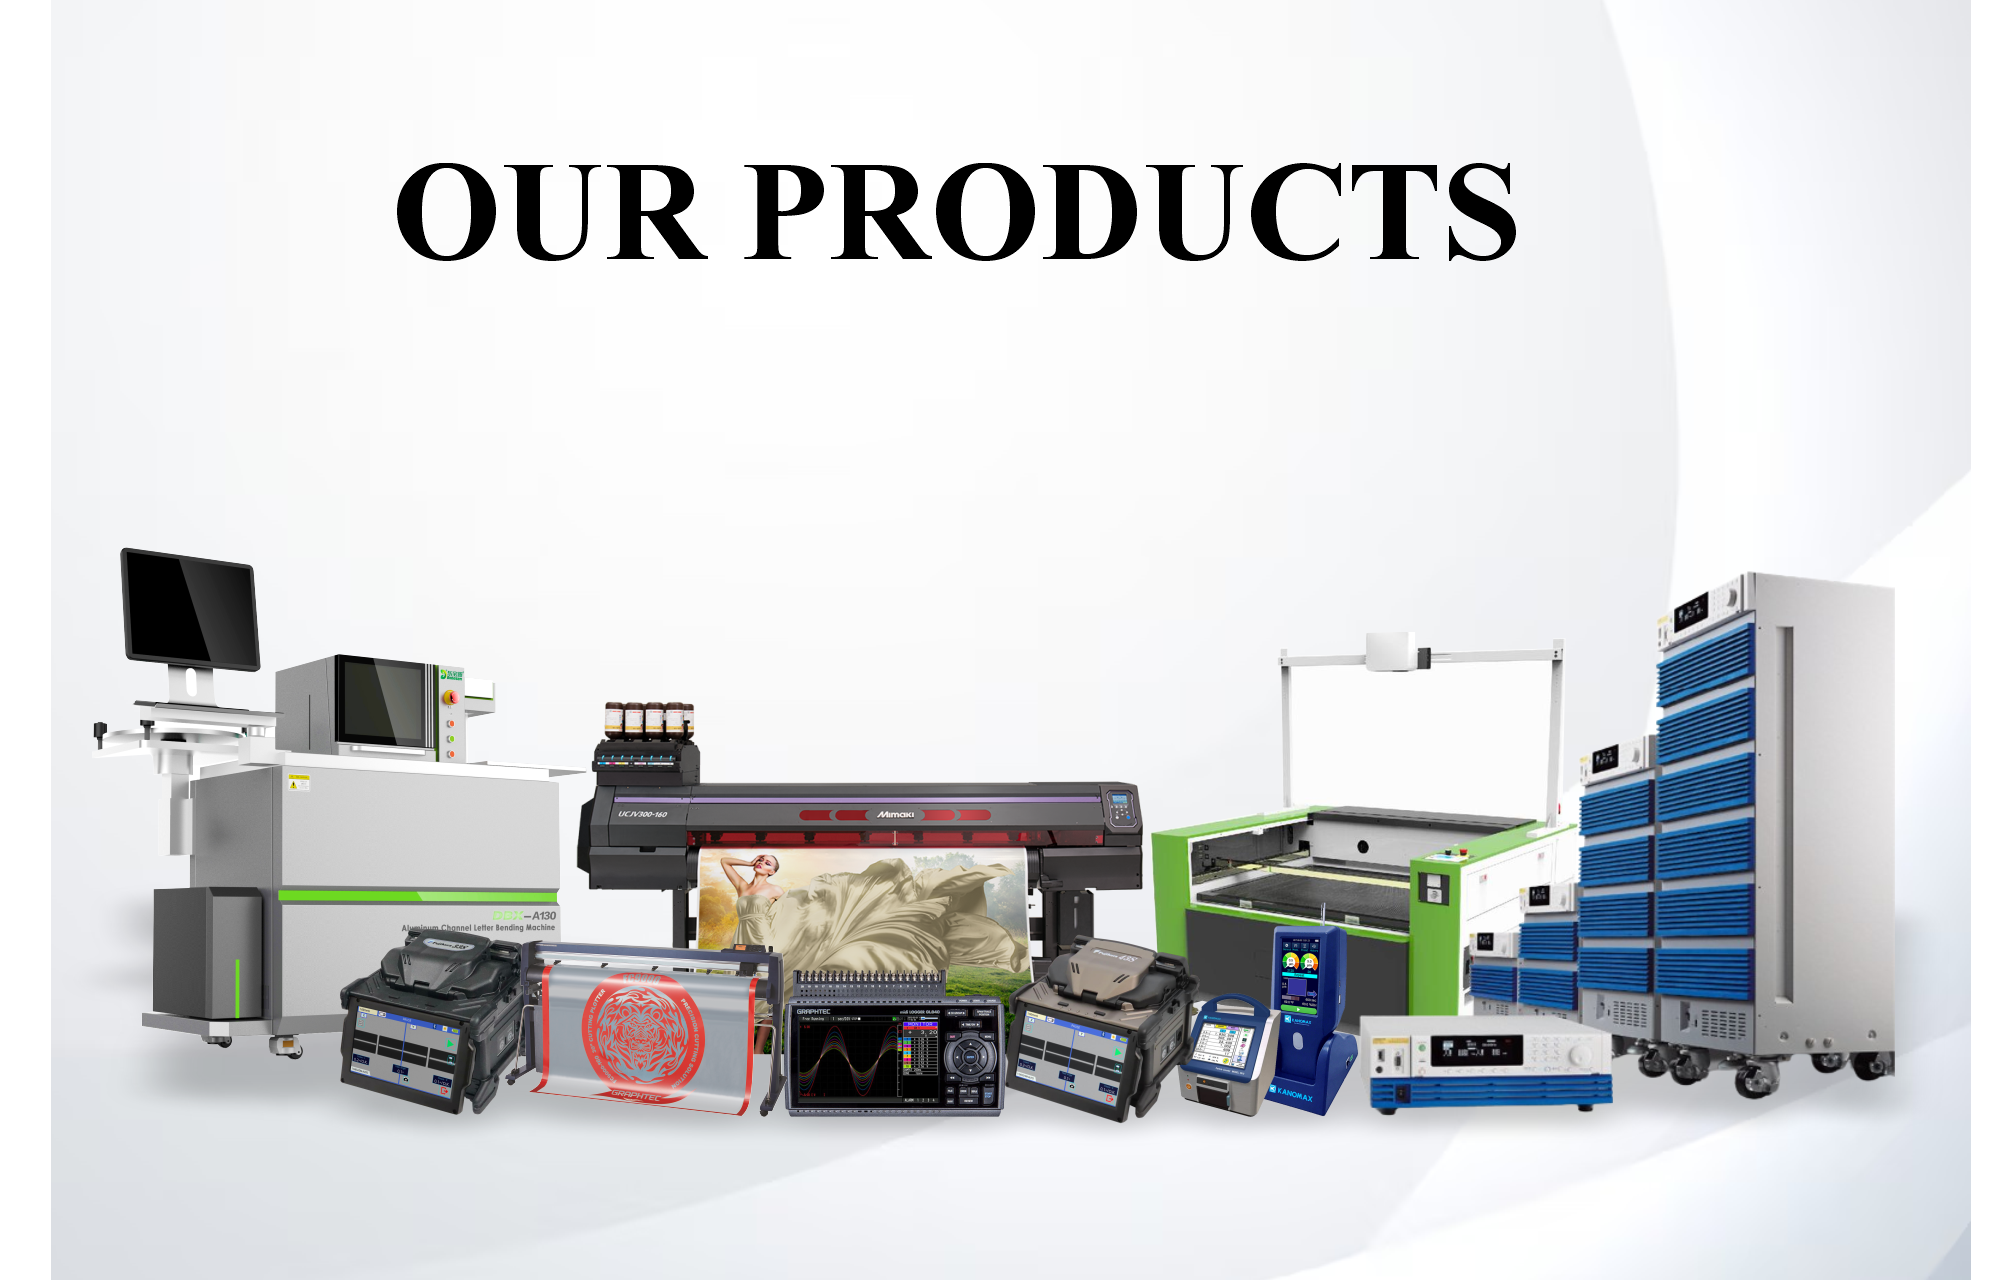 KeithOur products